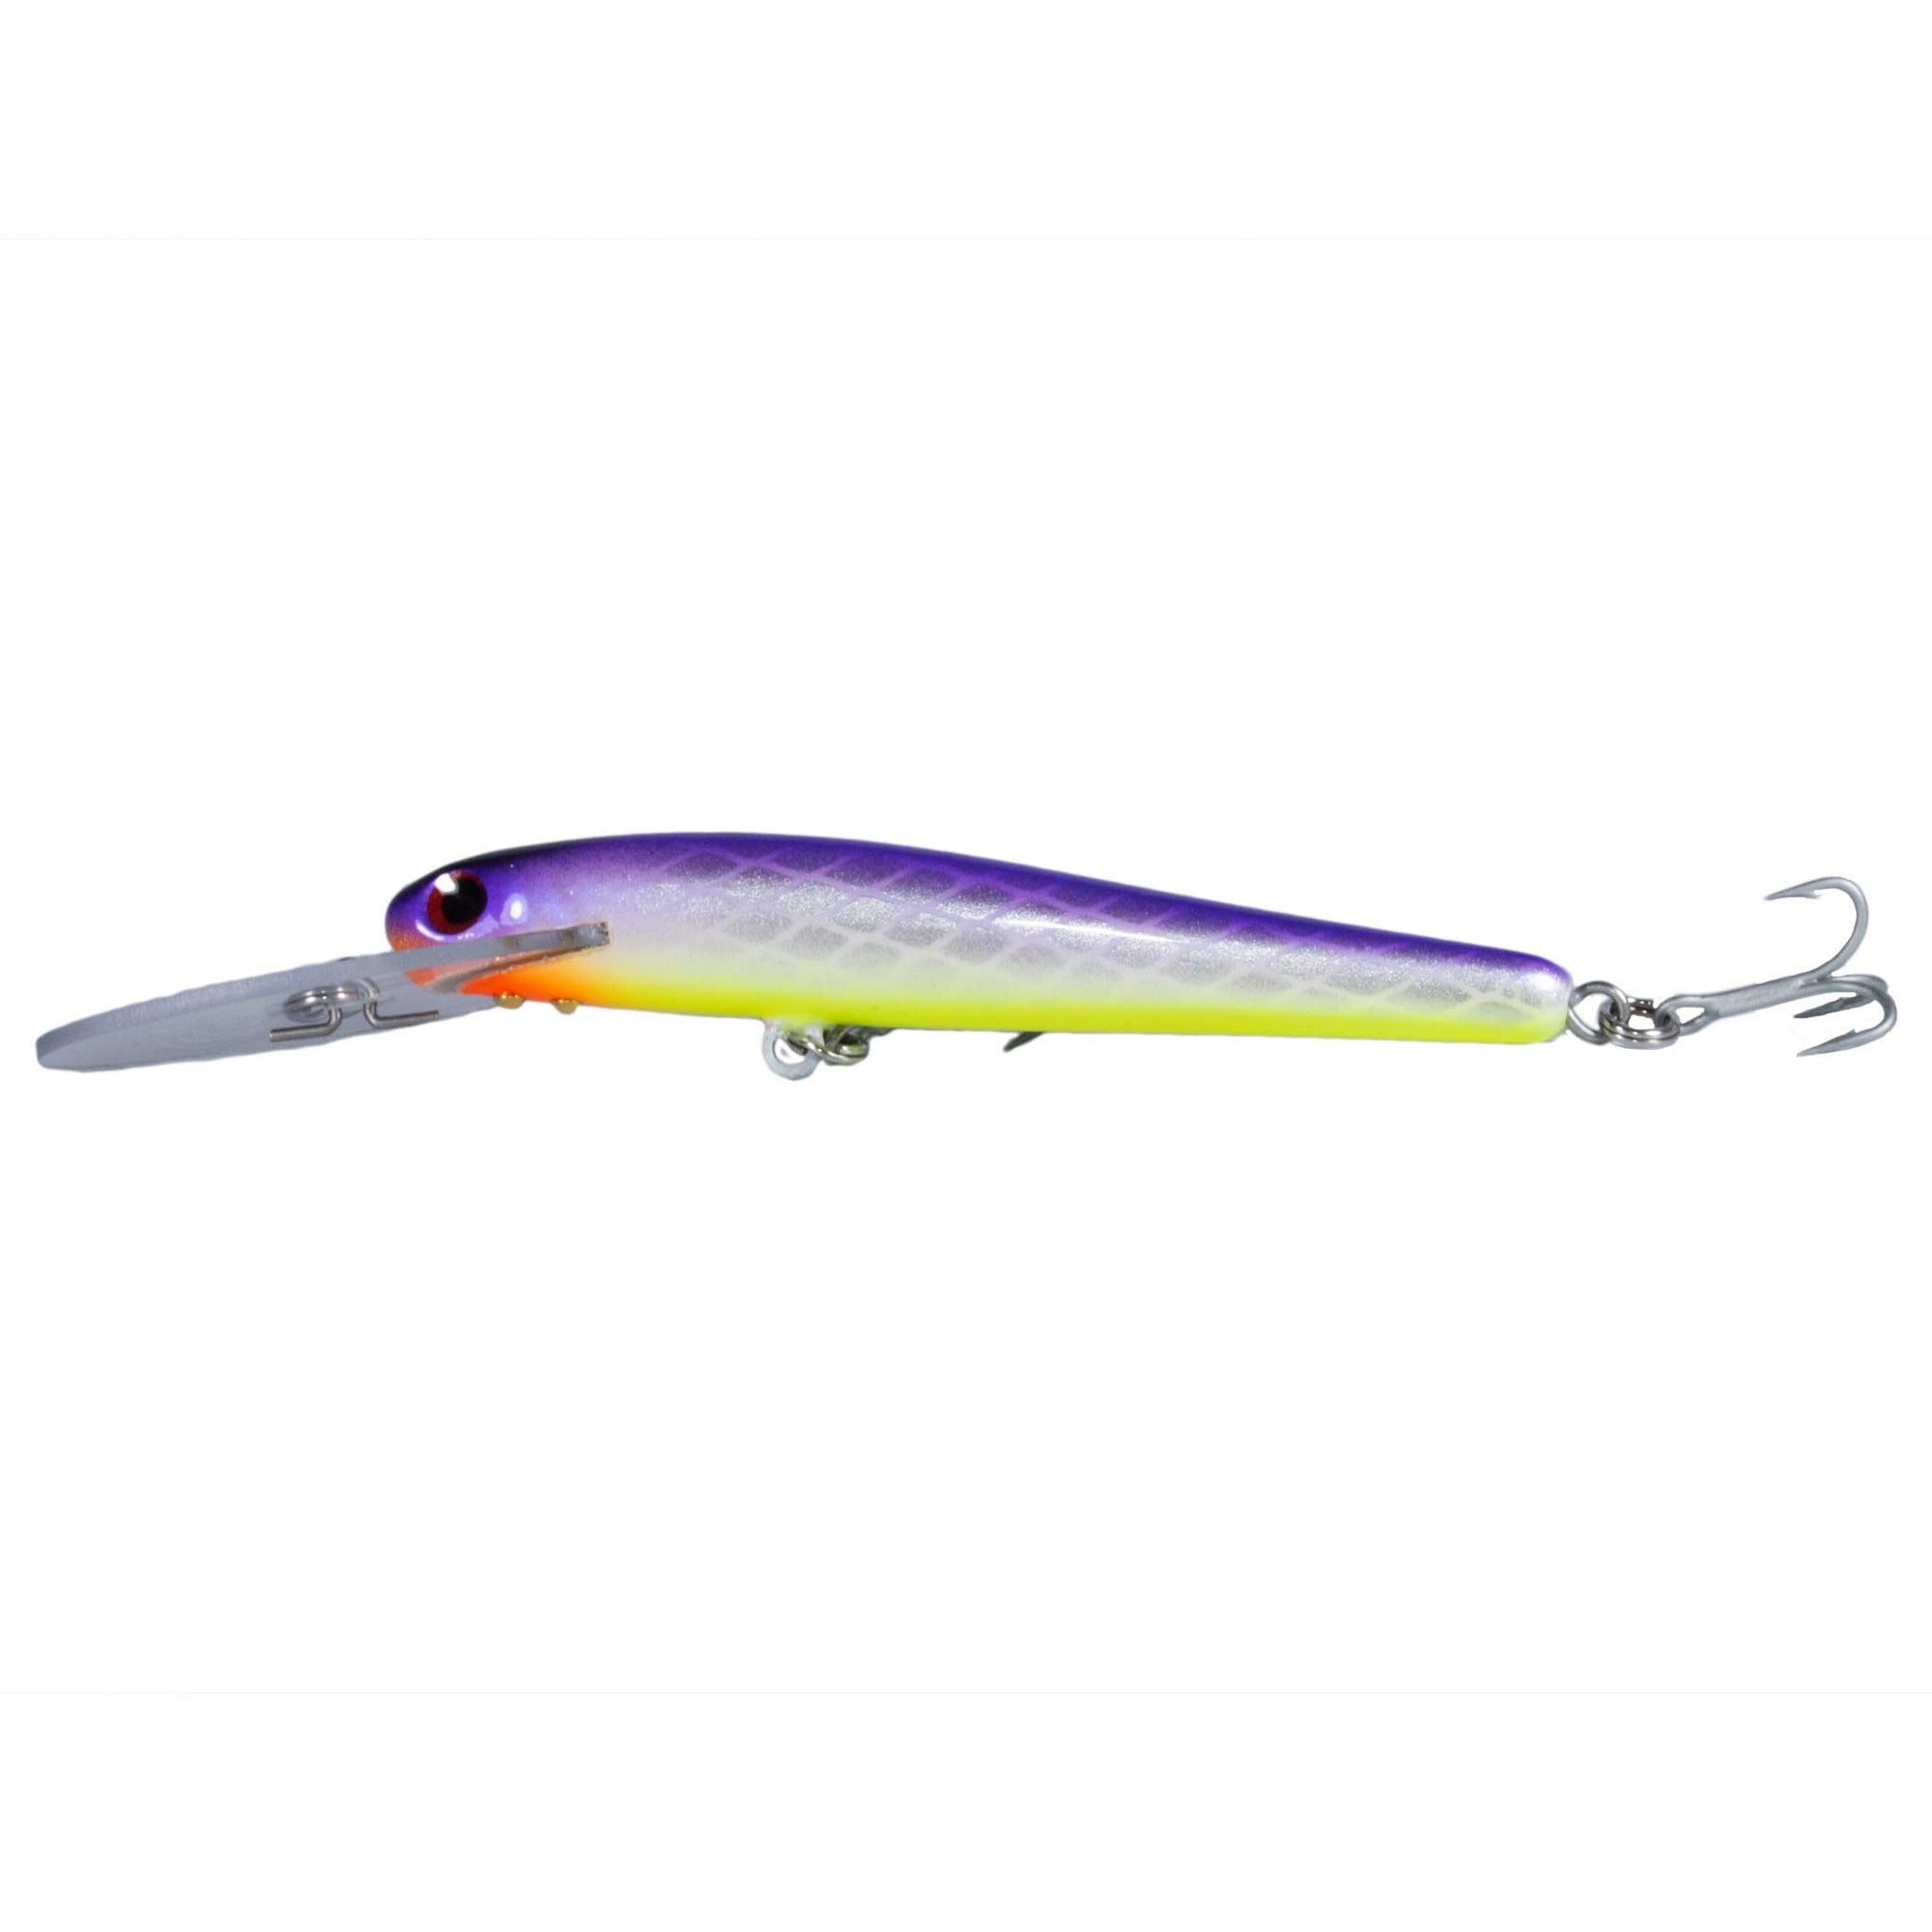 Eyecon 115 Deep 10+ - 115mm Handcrafted Timber Fishing Lure